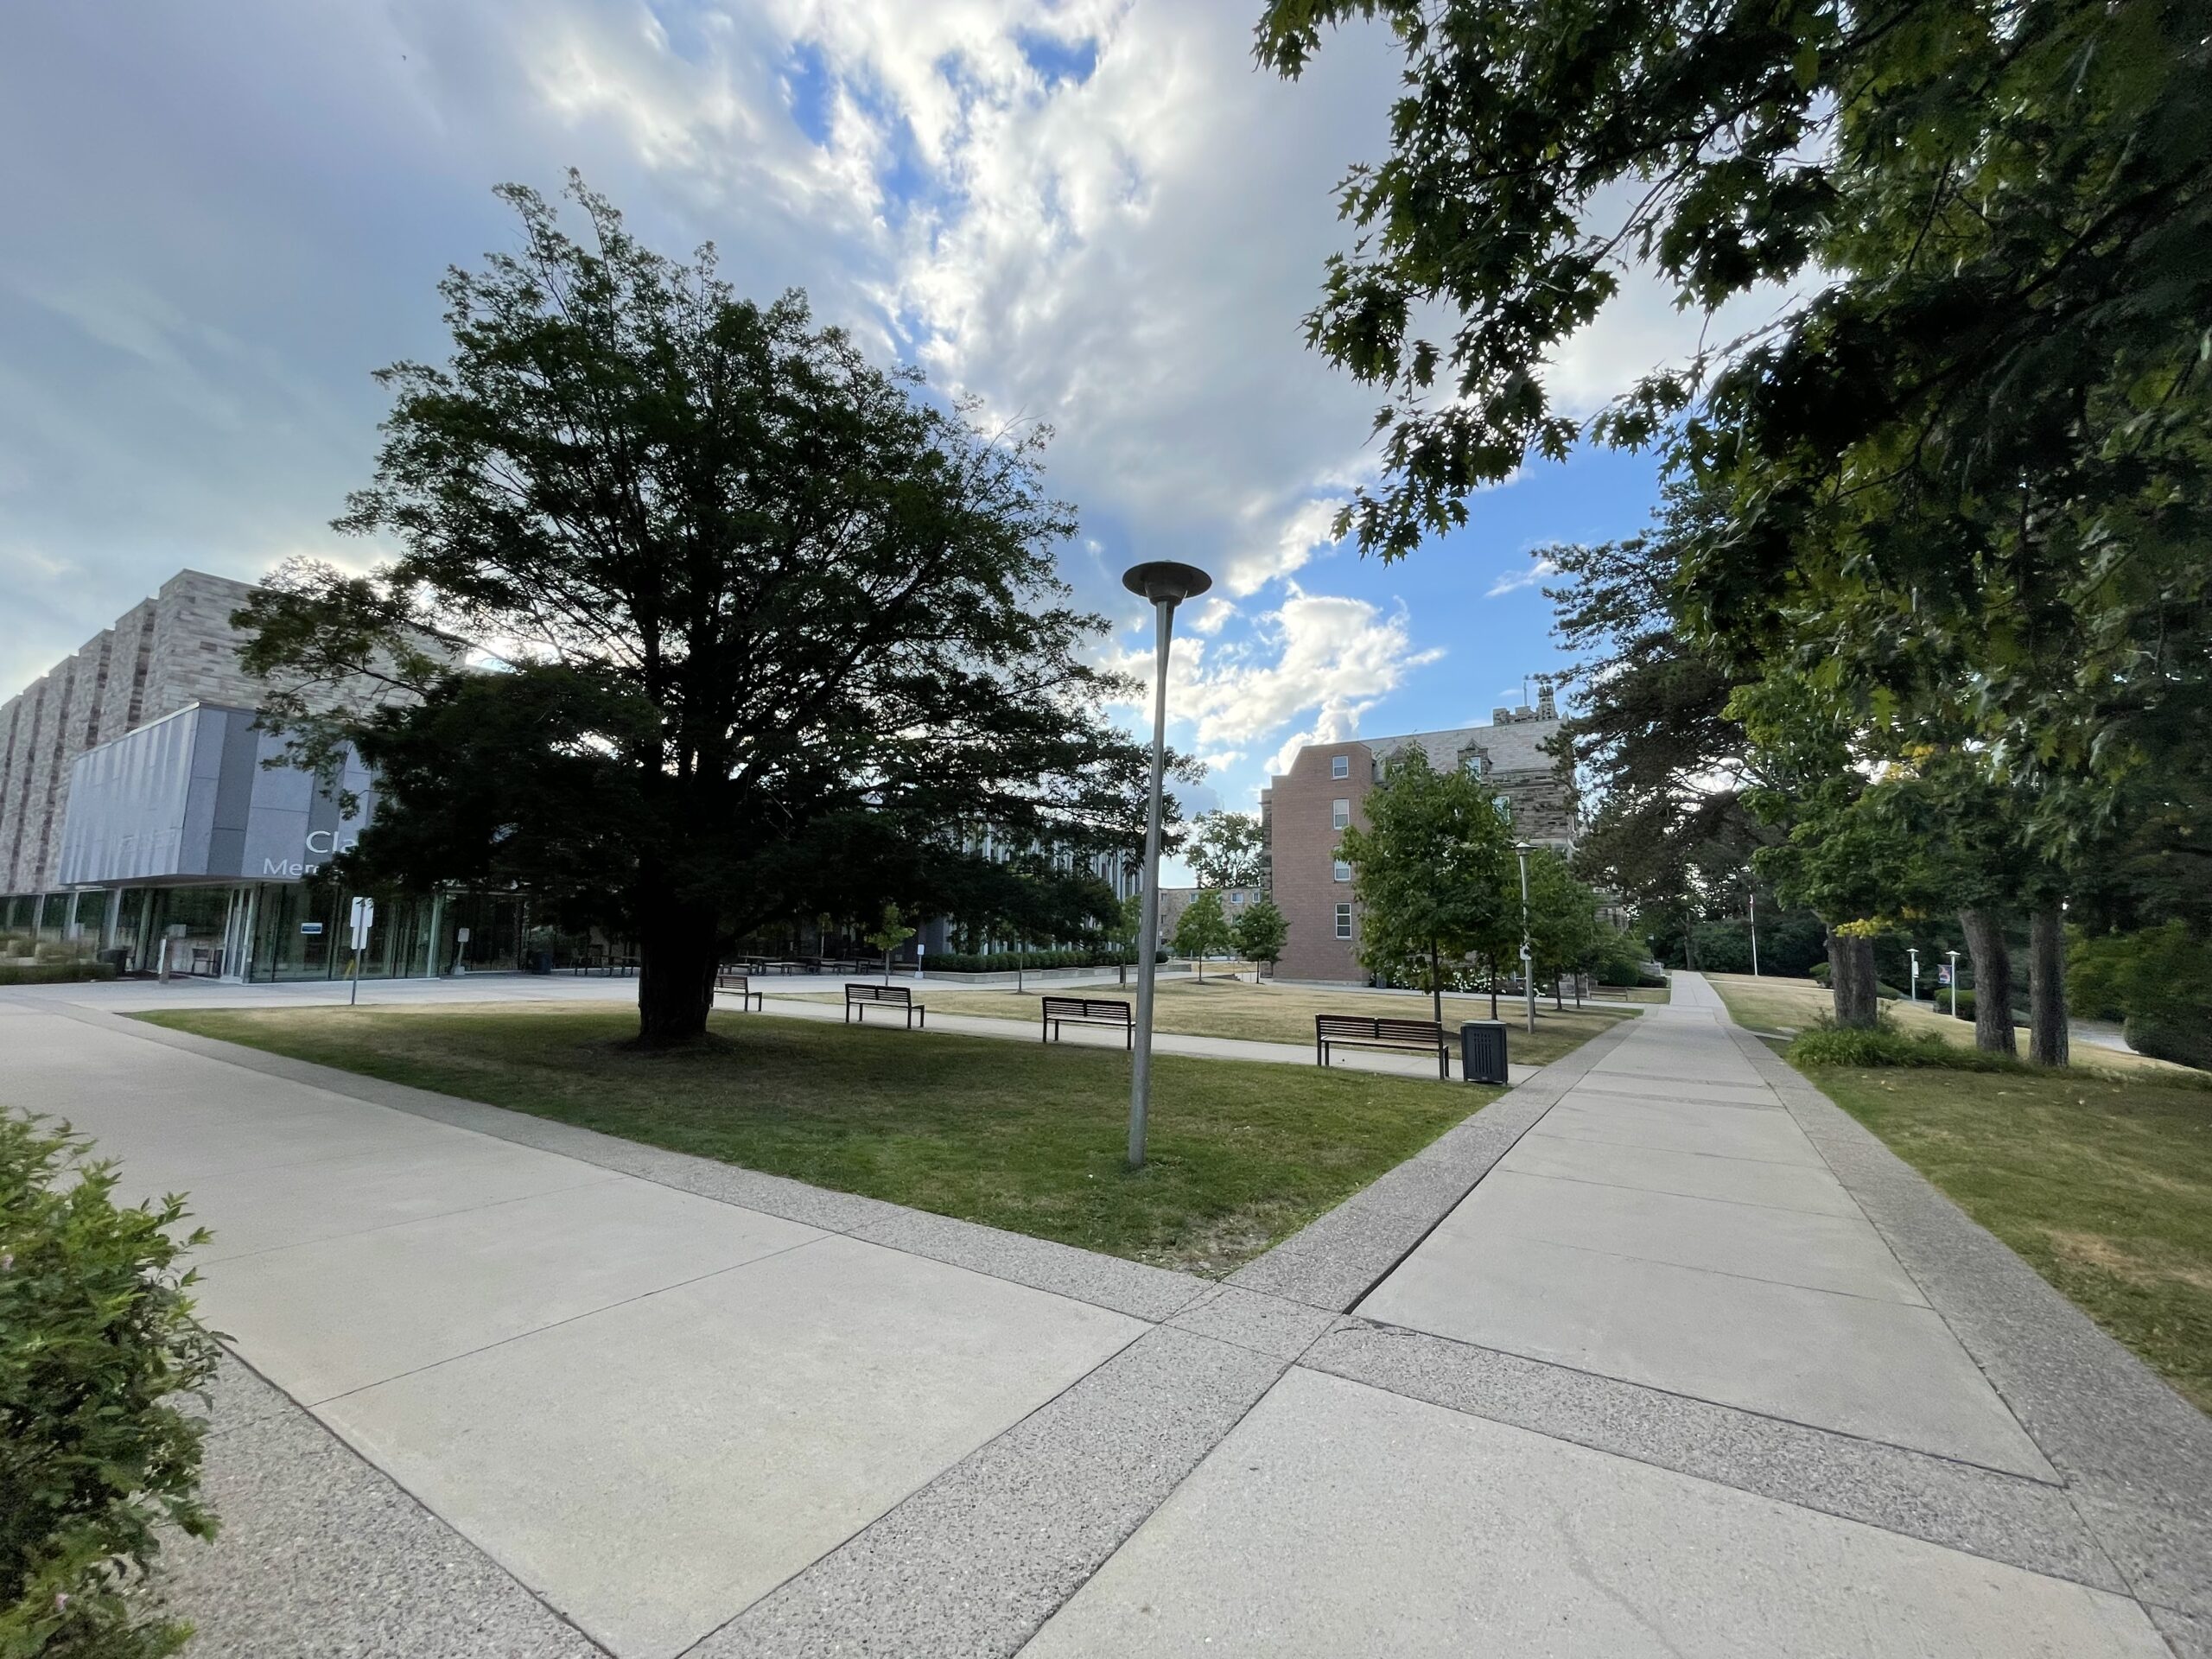 Clare Hall to left Living Piazza in centre and path to UH from MSJ